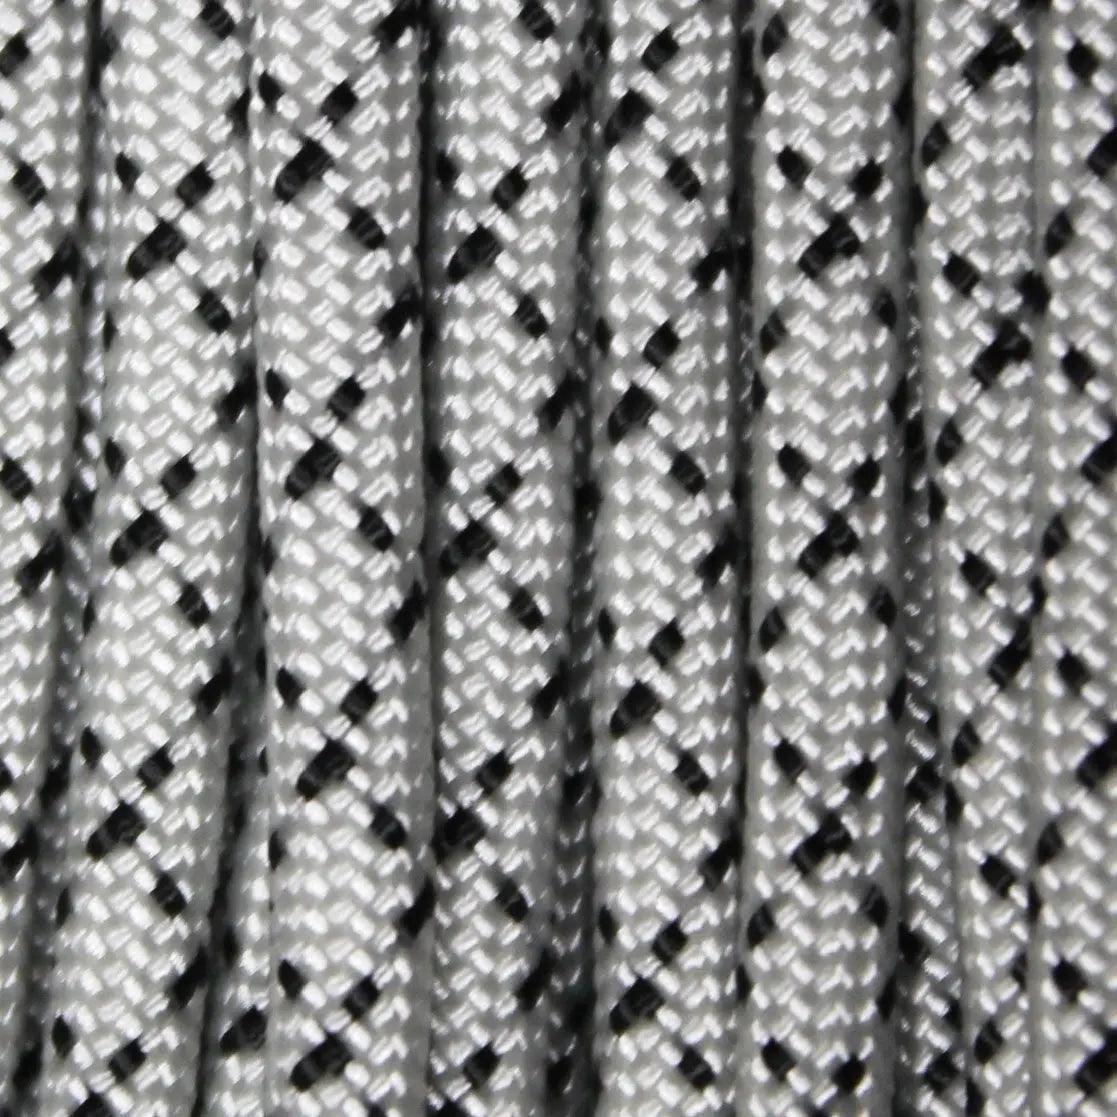 550 Paracord Starry Night-Silver with Black Made in the USA Nylon/Nylon (100 FT.) - Paracord Galaxy